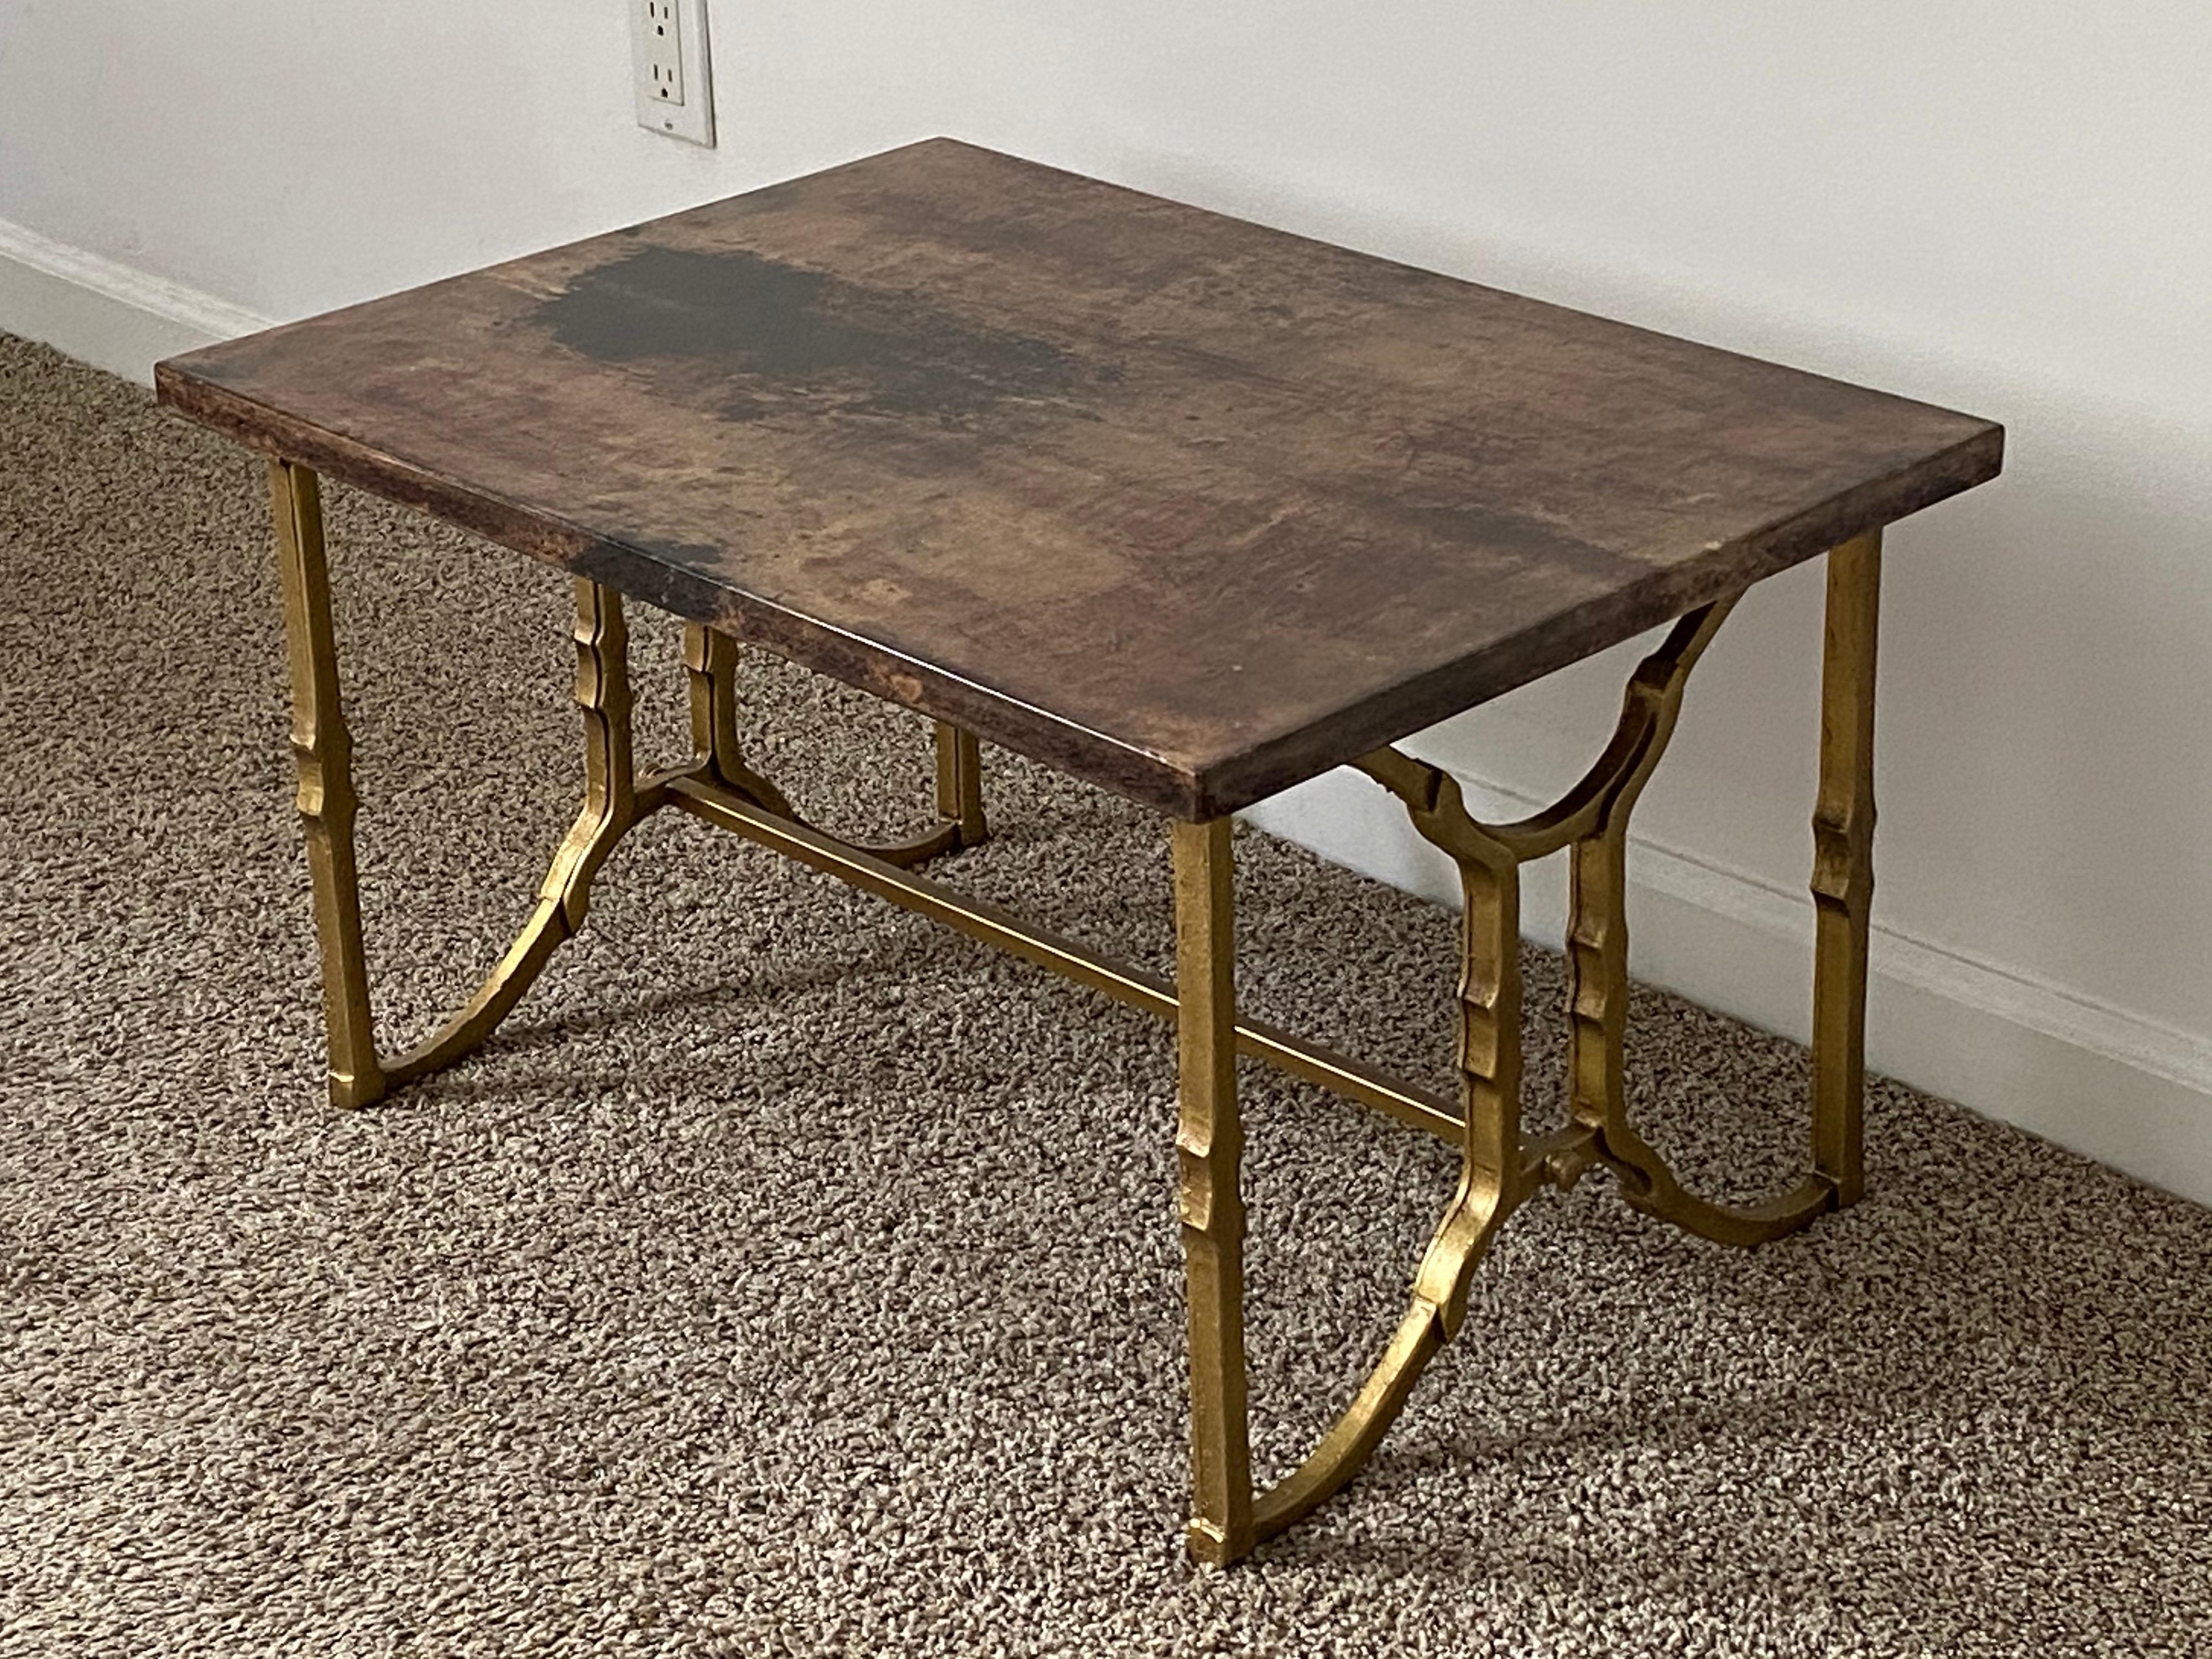 Italian lacquered goat skin table with gold painted metal by Aldo Tura, circa 1970s.